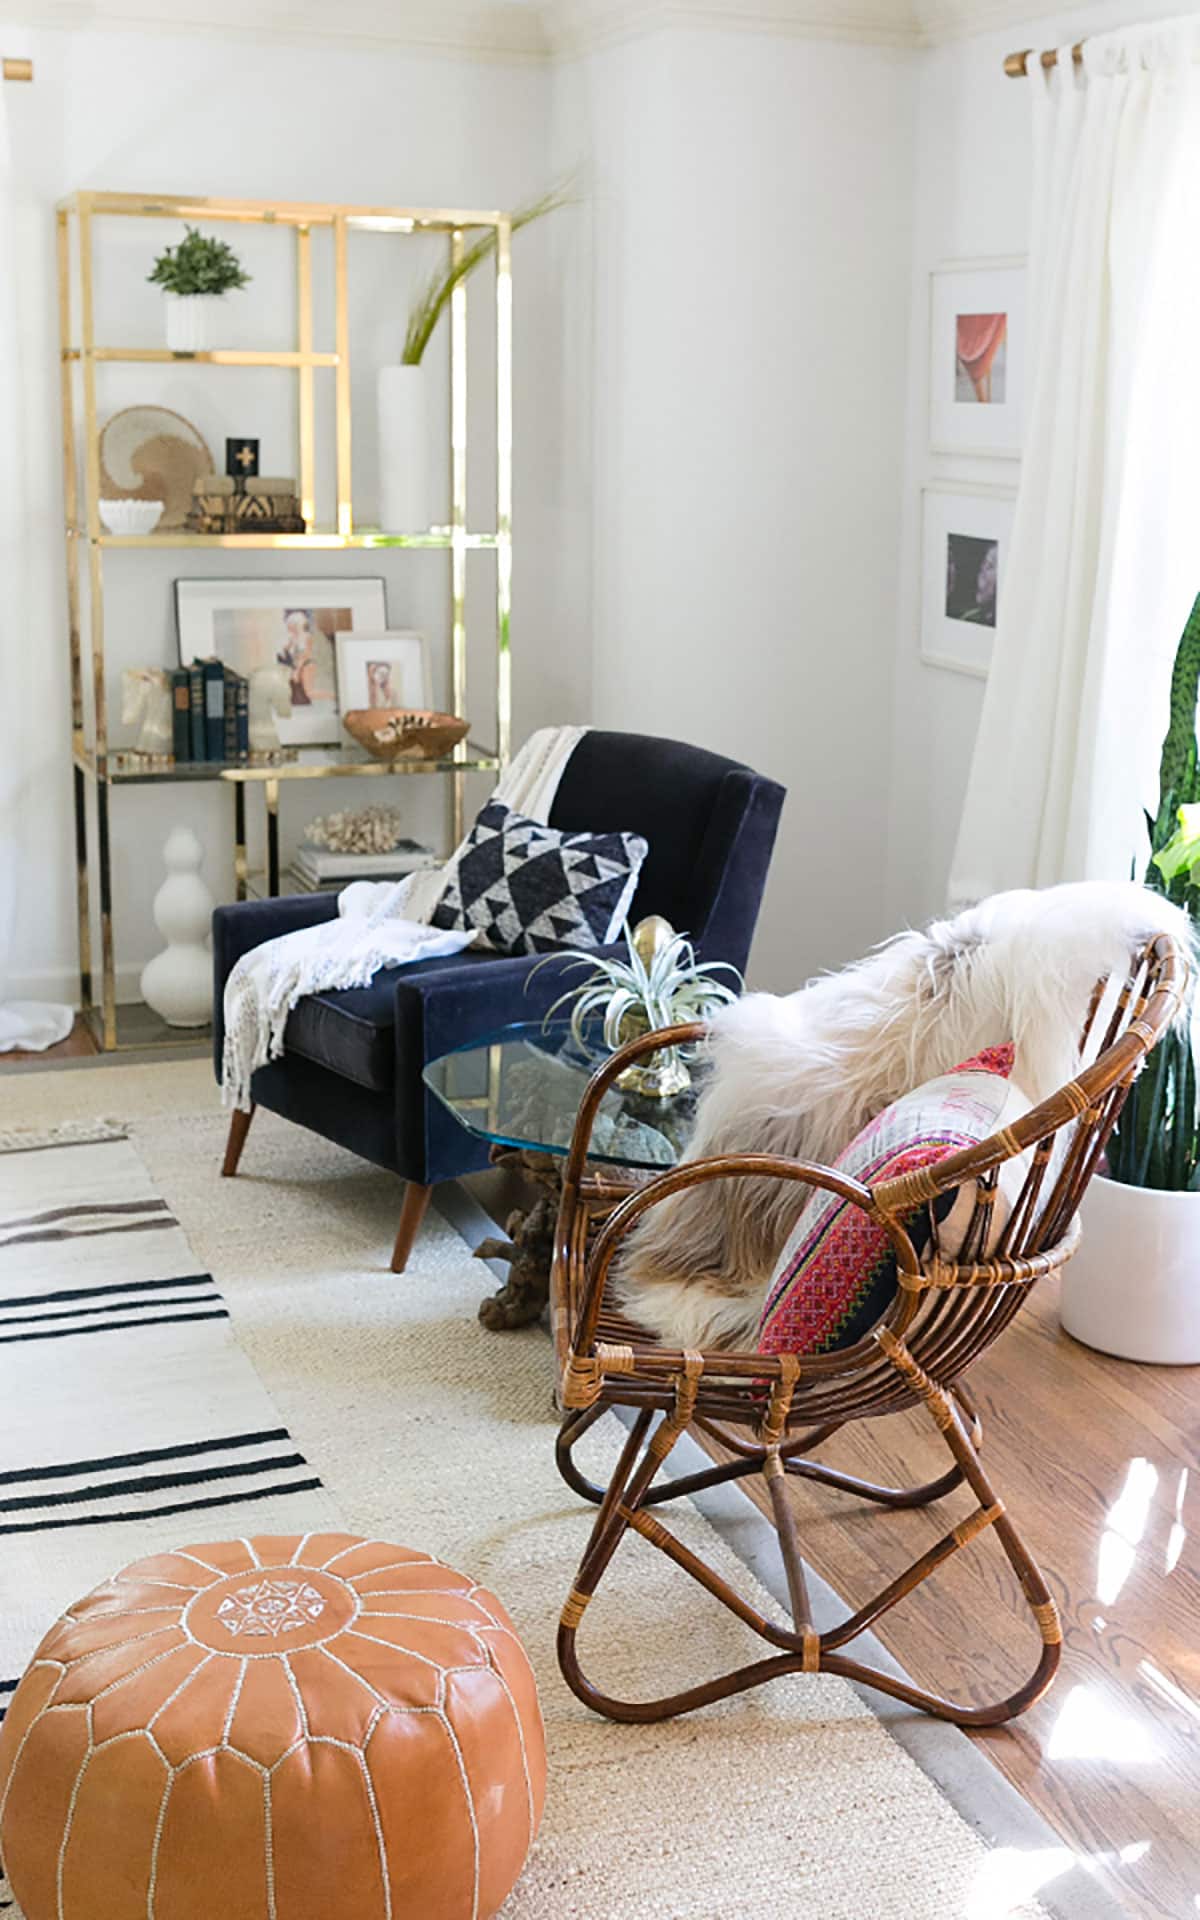 eclectic modern decor in living room makeover - Modern Boho Living Room Makeover